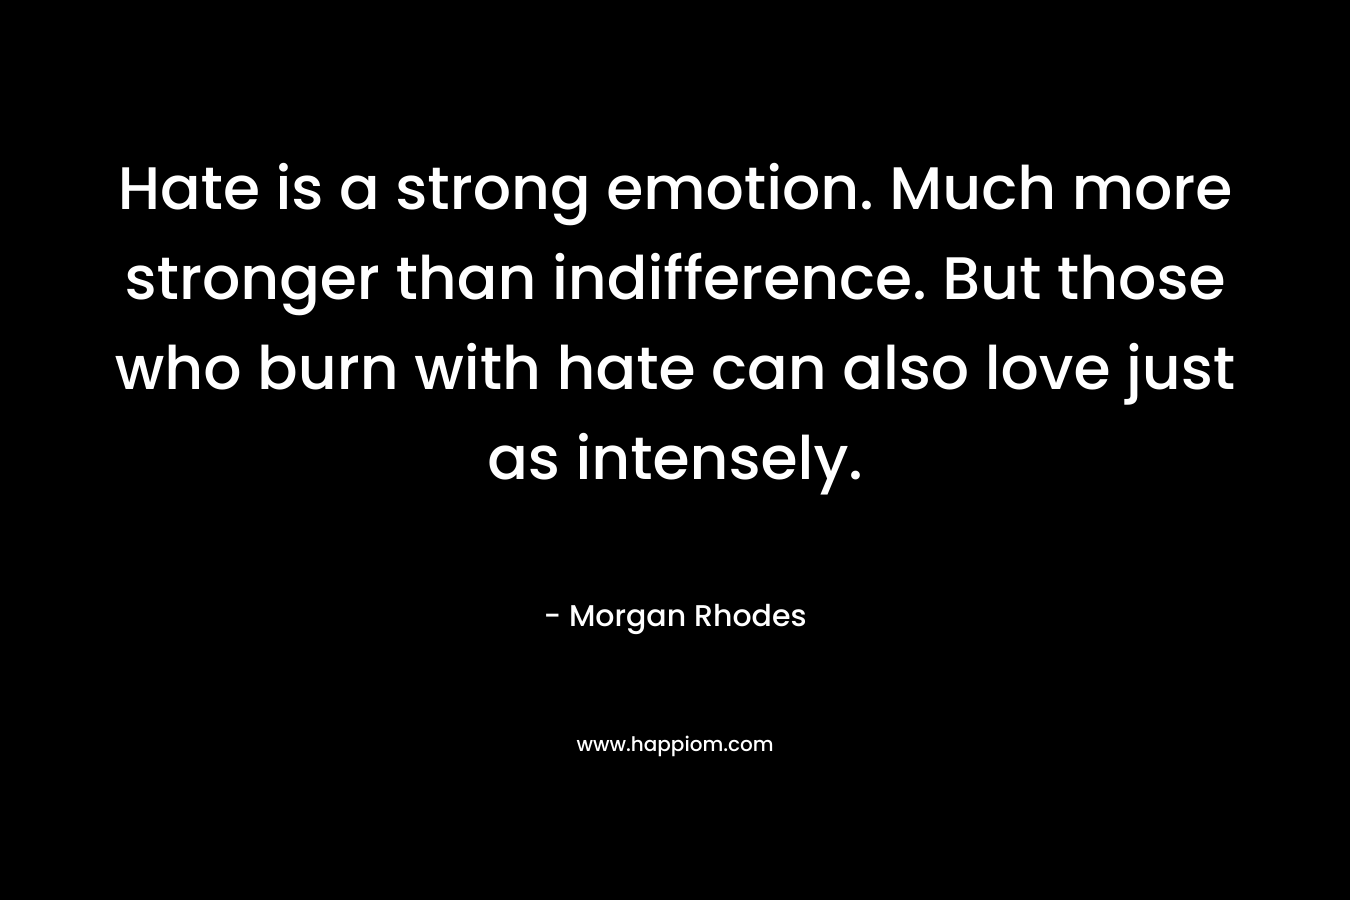 Hate is a strong emotion. Much more stronger than indifference. But those who burn with hate can also love just as intensely. – Morgan Rhodes